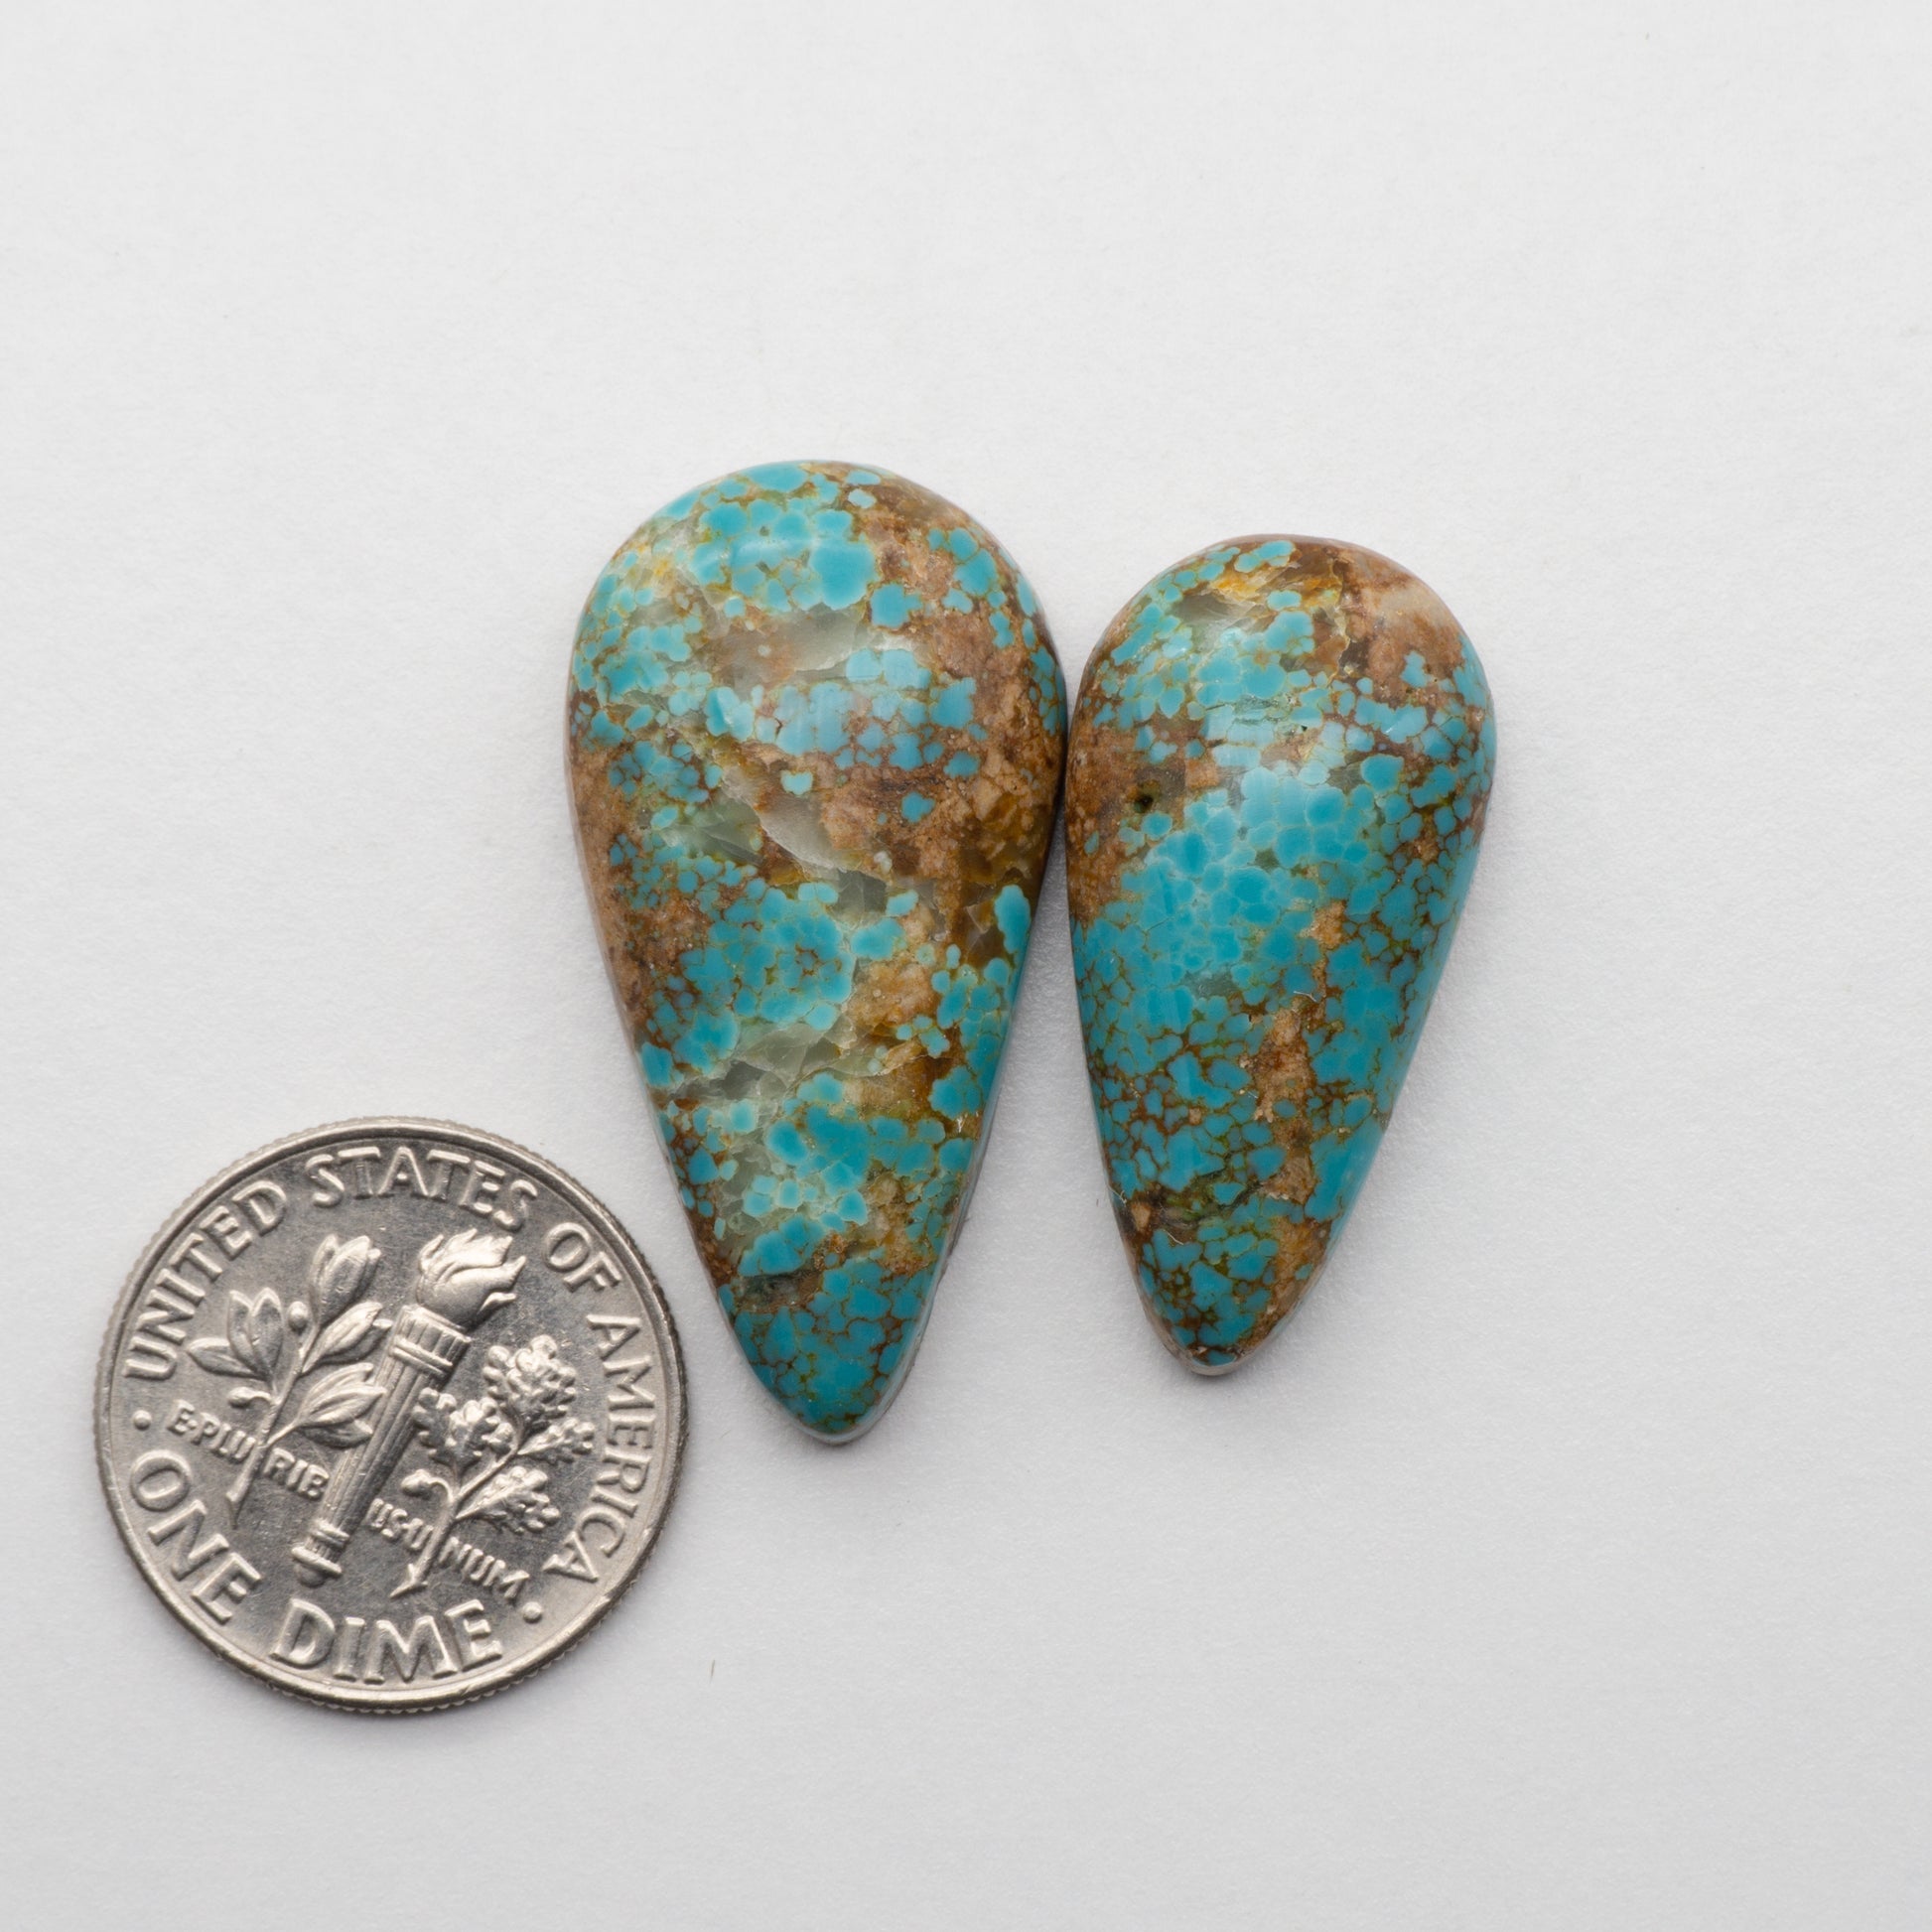 Number 8 Turquoise Cabochons add a perfect touch of luxury to any design. This type of turquoise is known for its striking, even, and intense blue-green color. Its hardness of 6-6.5 on Mohs scale allows it to be used for a variety of different jewelry designs.